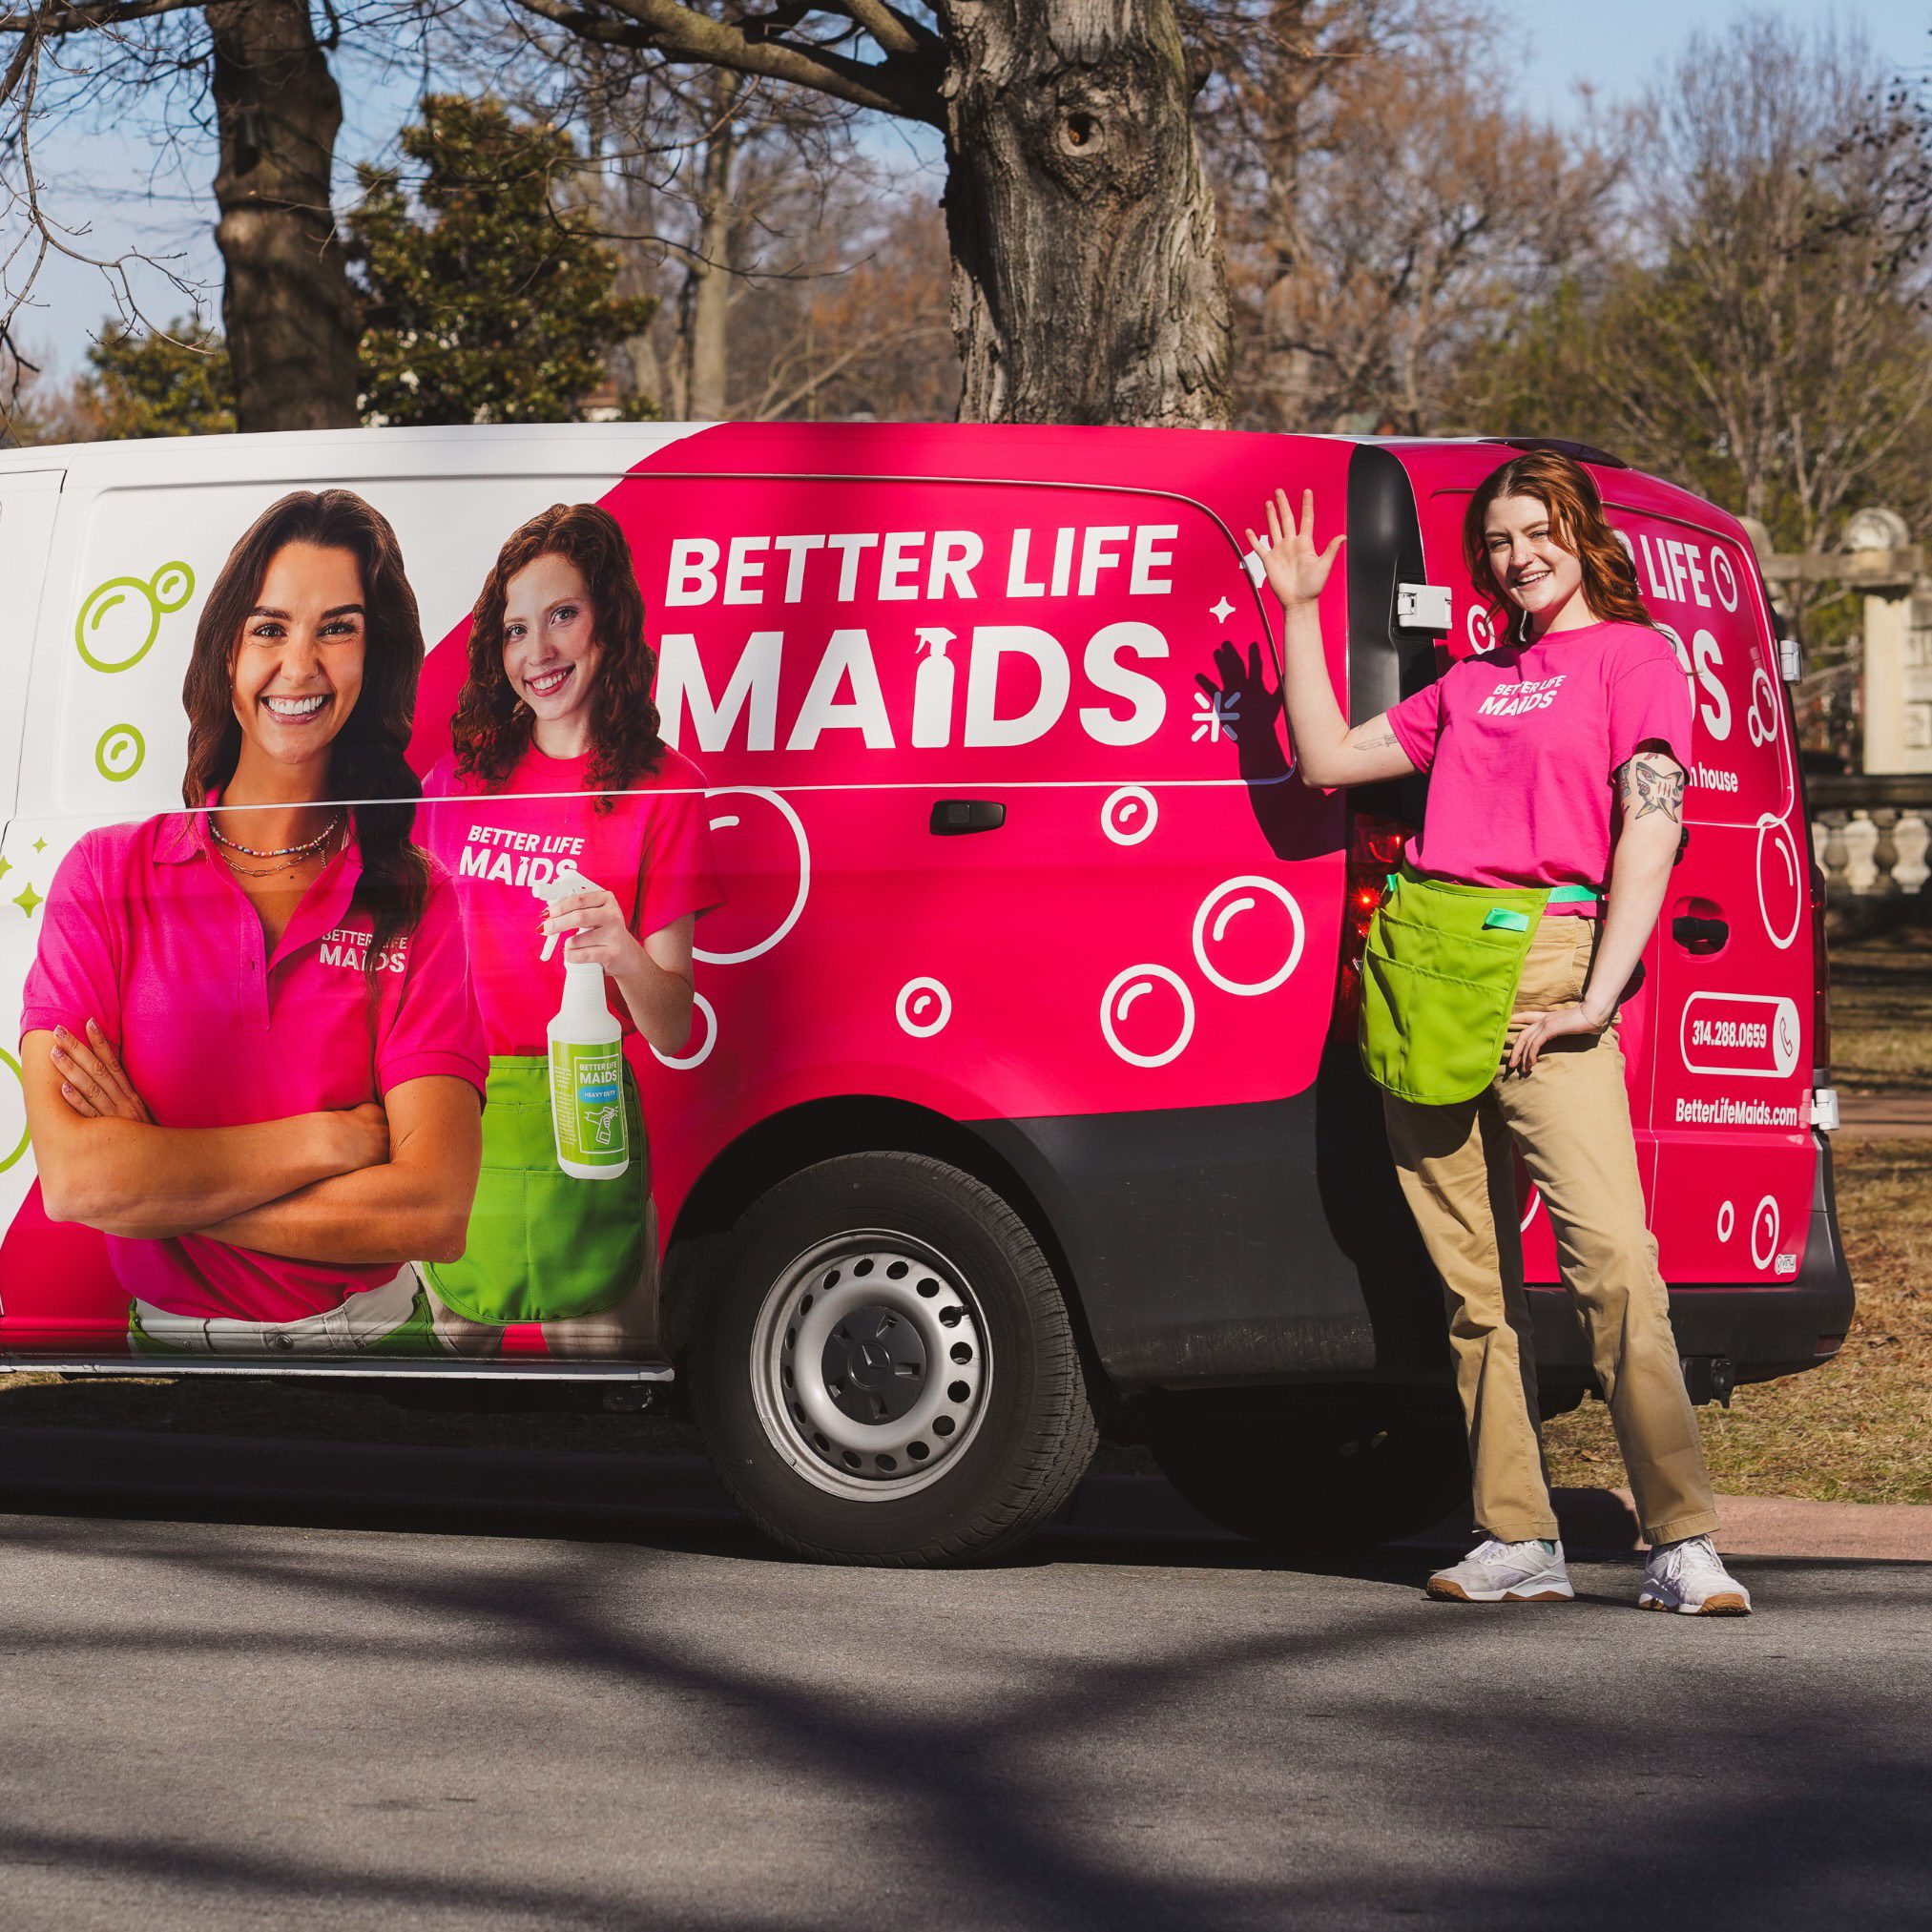 better life maids, house cleaning in maplewood, house cleaning near me, house cleaning near maplewood, best maids in maplewood, best maid service near me, top quality maids, residential cleaner, move out maids maplewood, green cleaning, eco cleaning